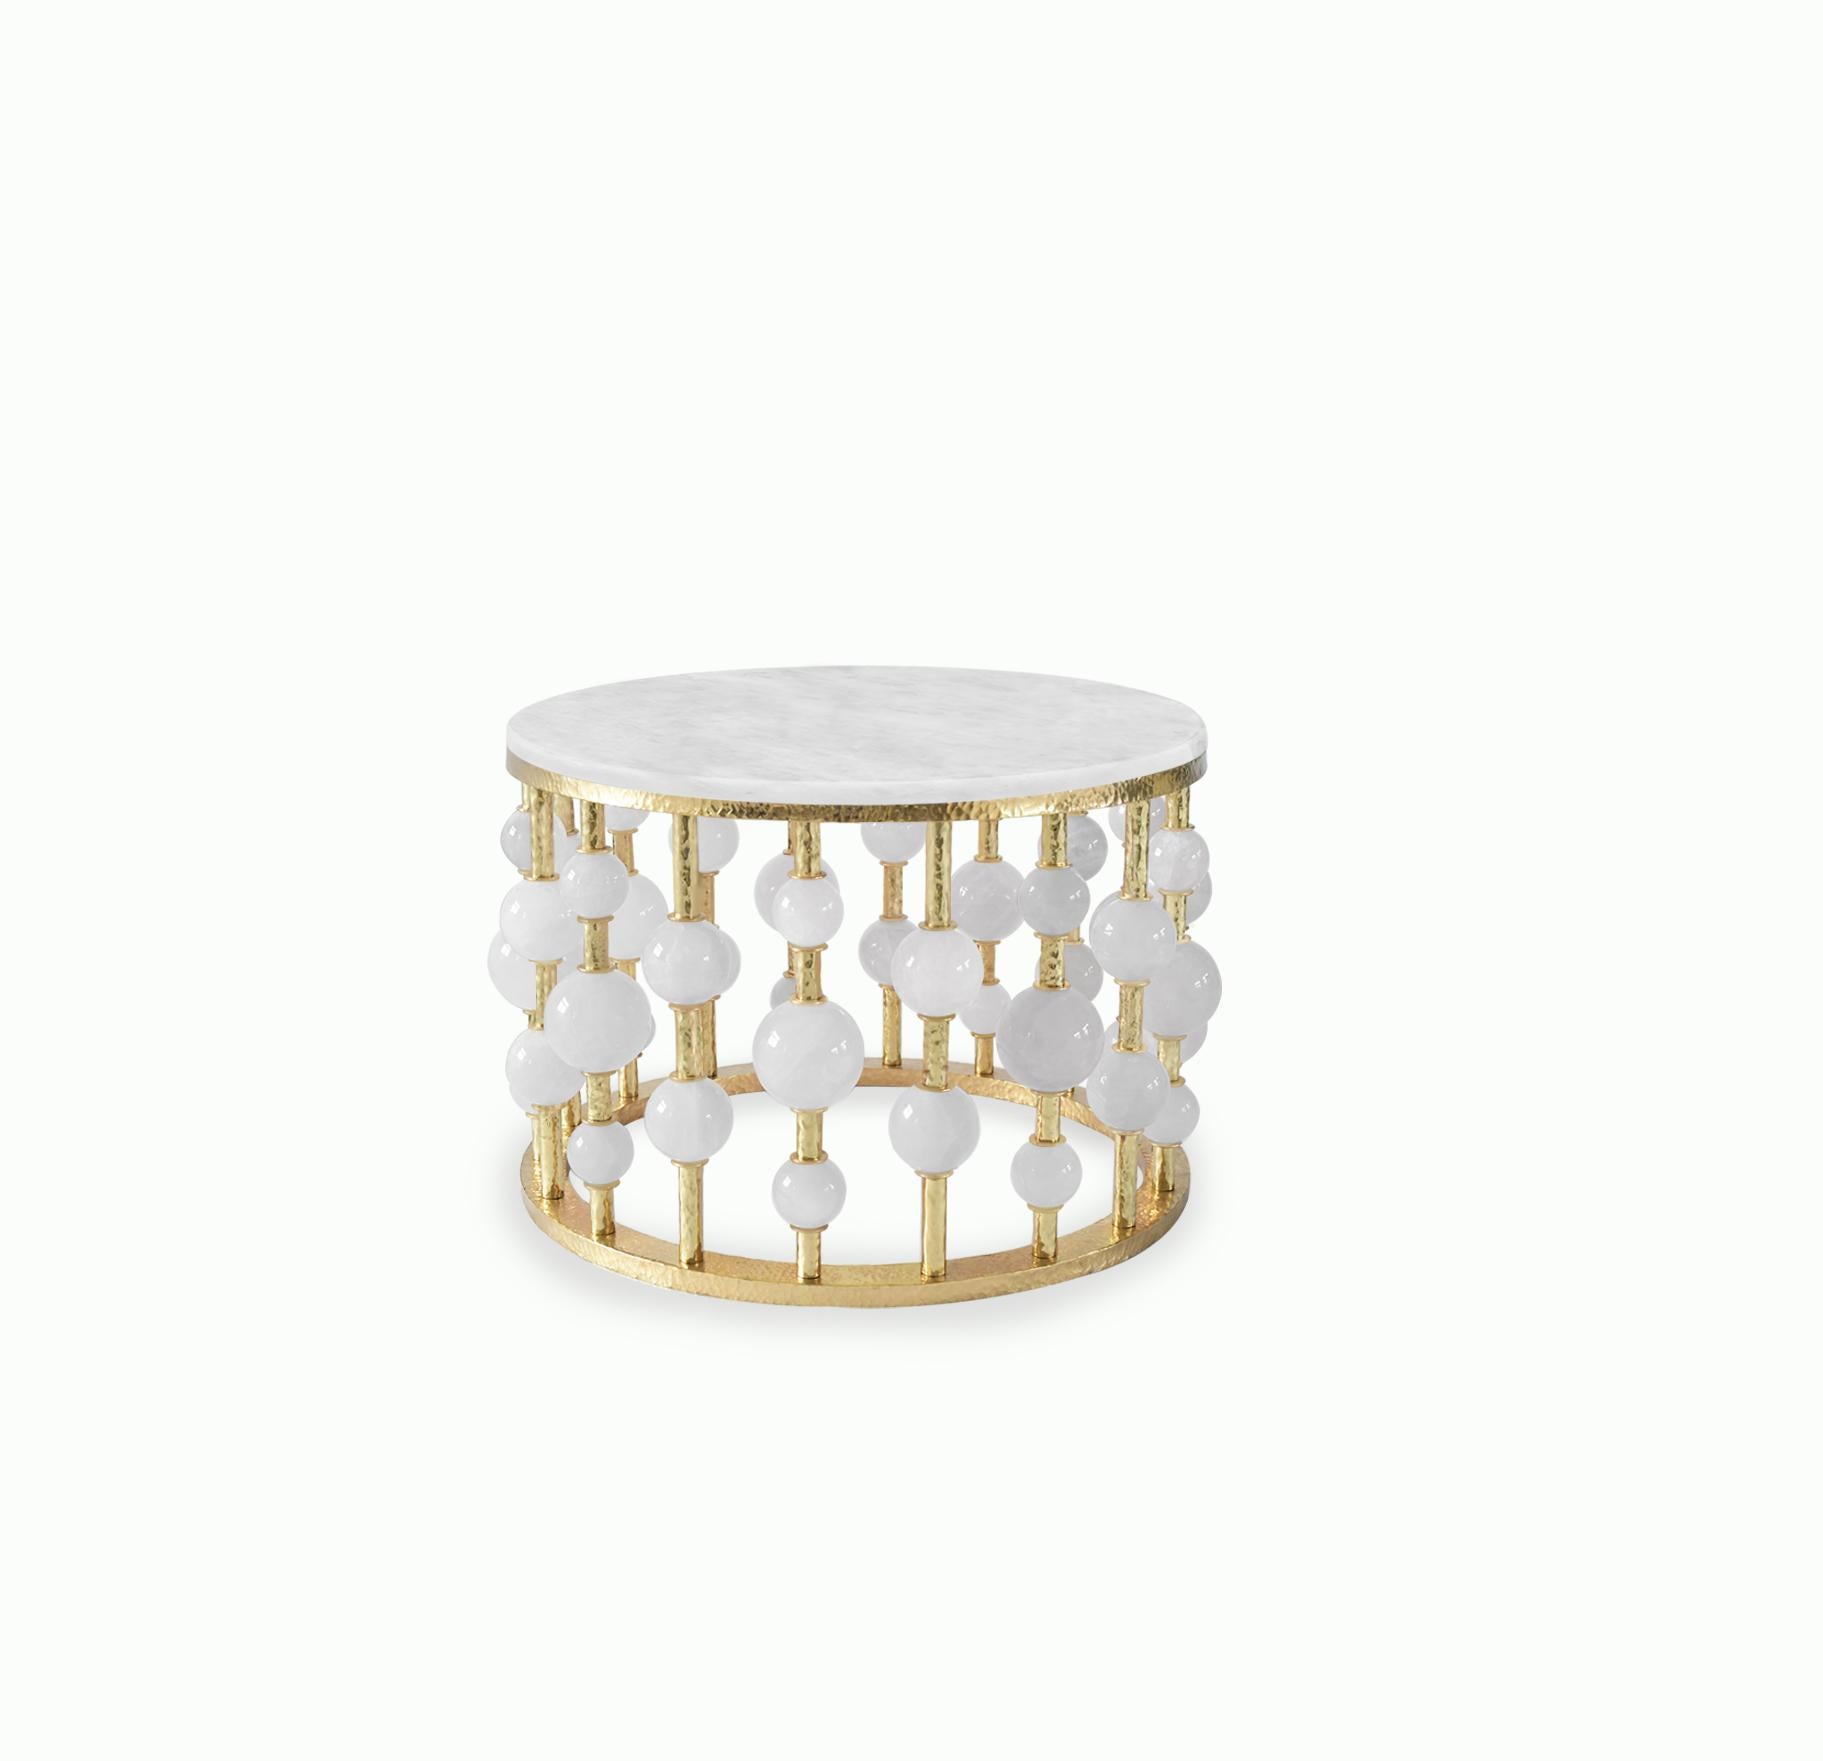 Rock crystal bubble cocktail table with hammered brass frame. Created by Phoenix Gallery, NYC. 
Custom size upon request.